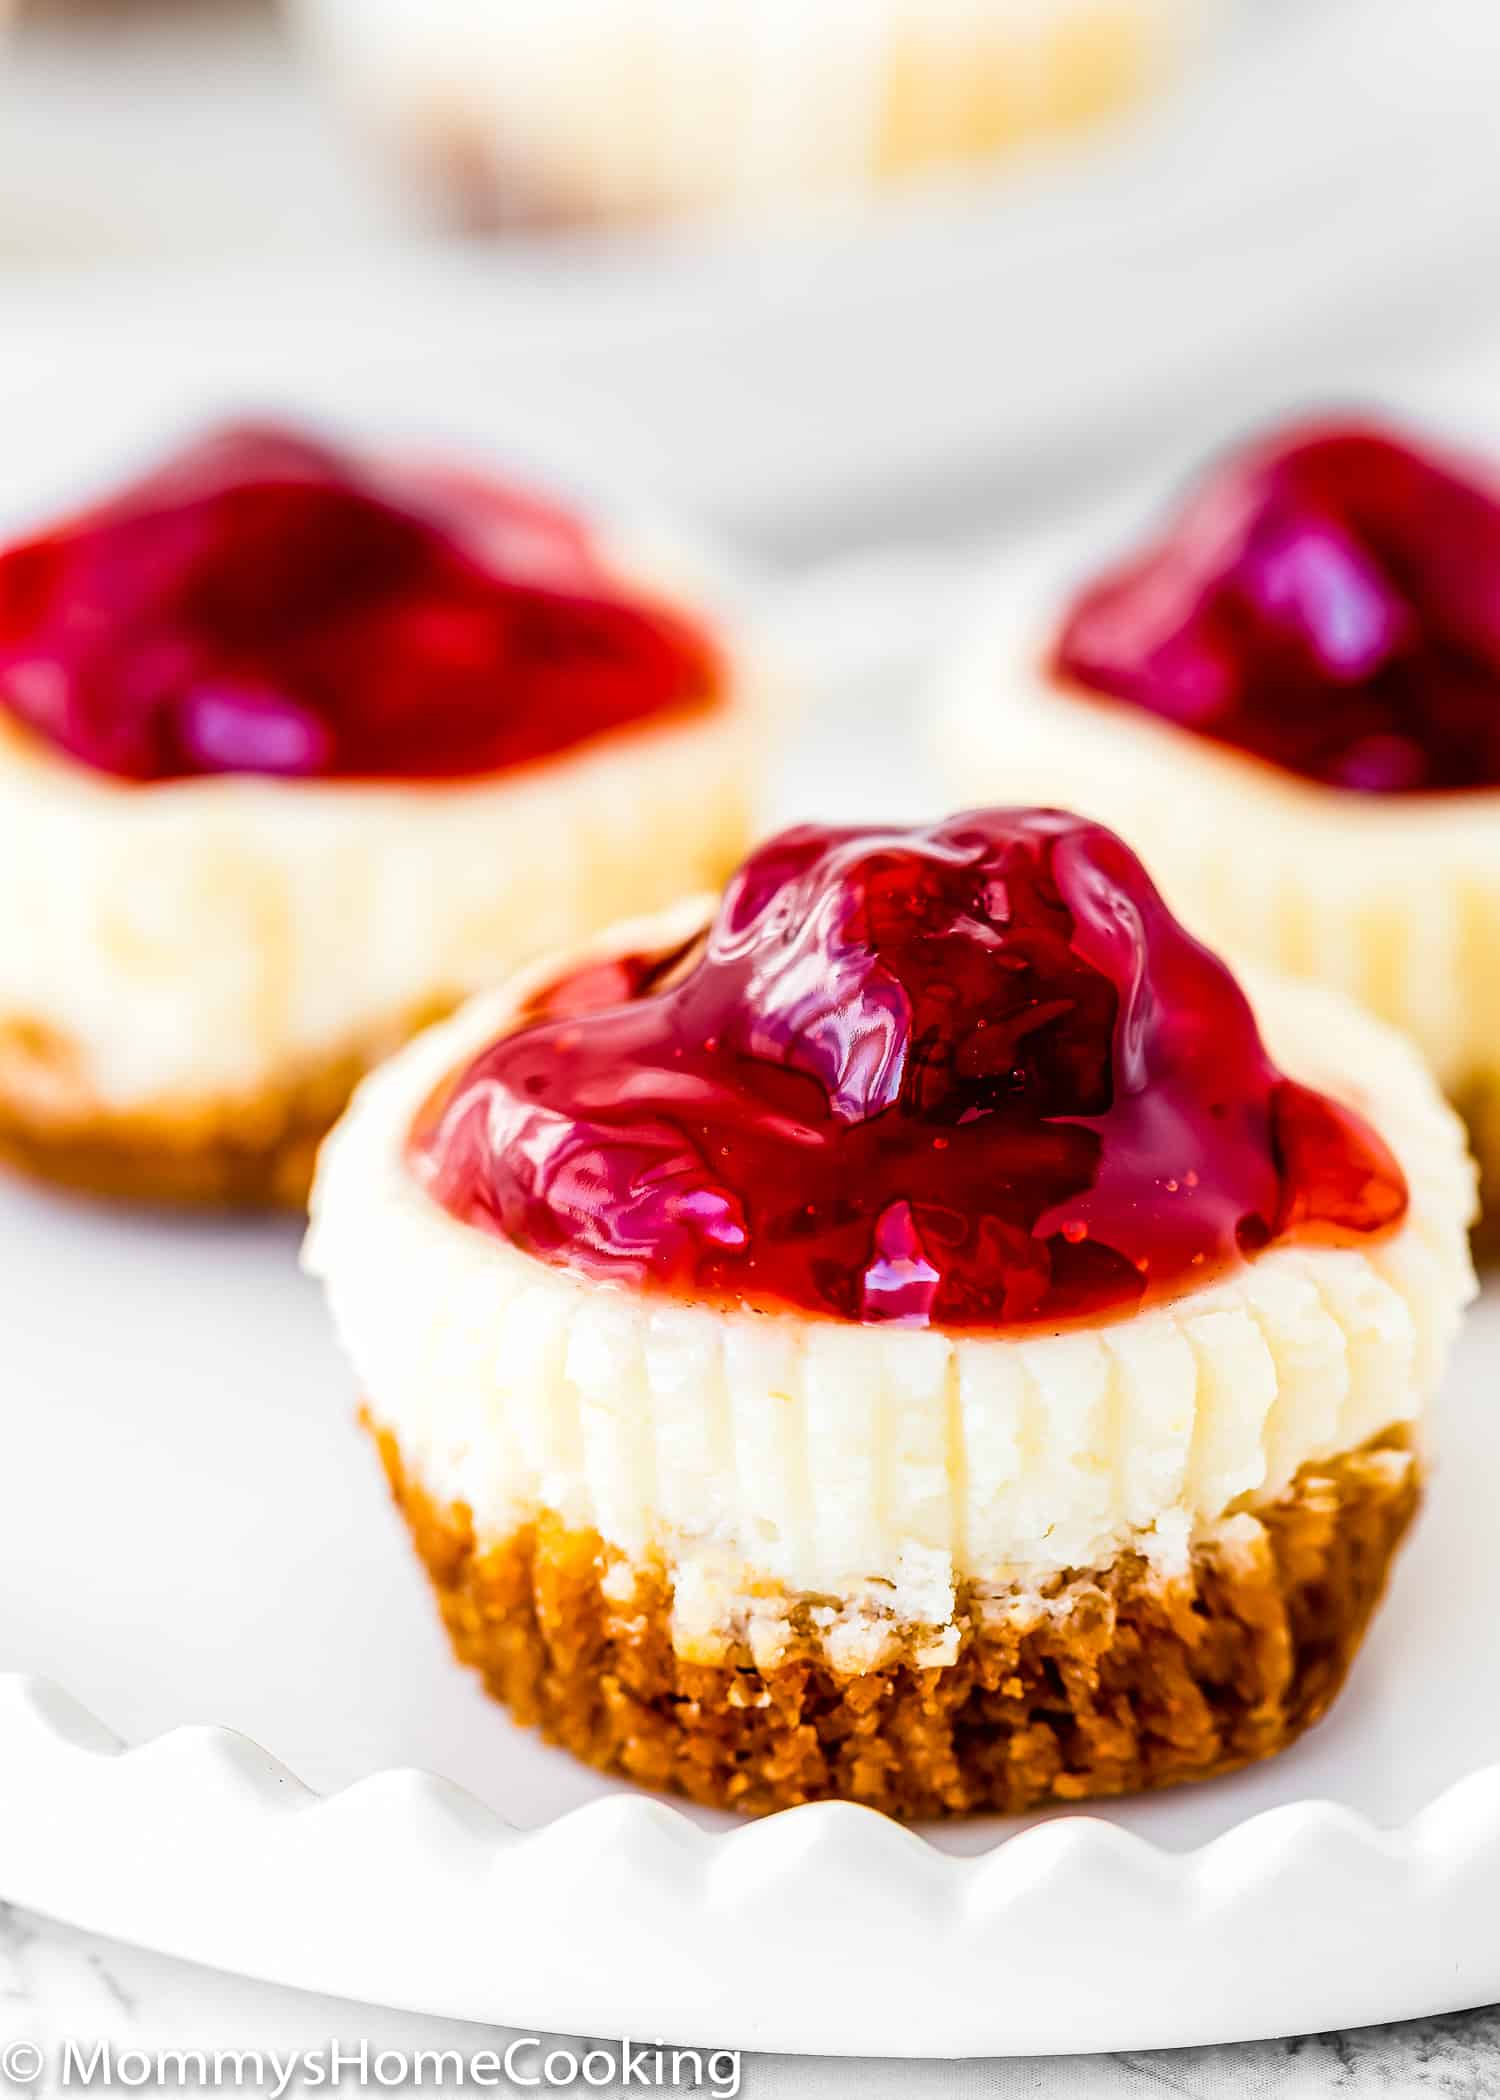 Best Ever Mini Cheesecakes - VIDEO post - Mostly Homemade Mom